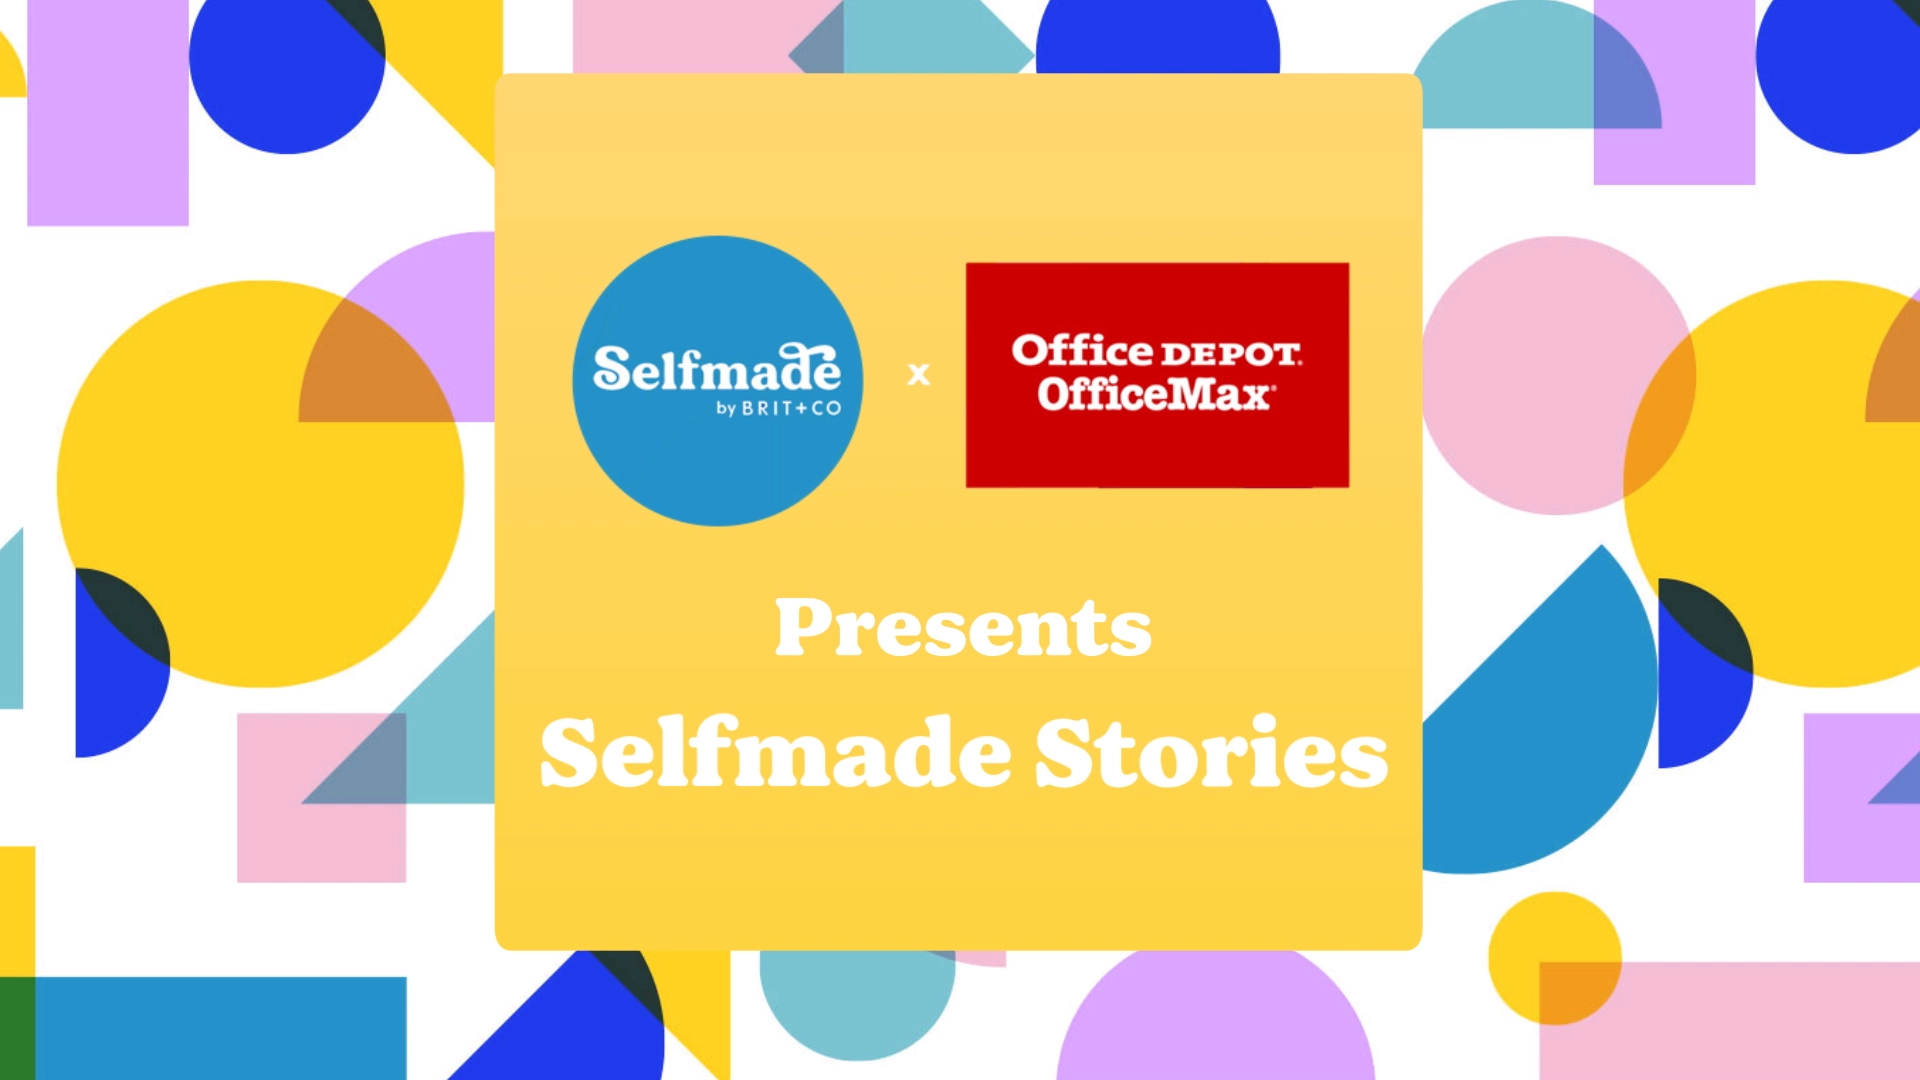 Brit + Co Launches Selfmade Season Six in Collaboration with Office Depot  to Help Women Start and Grow the Businesses of Their Dreams | Business Wire